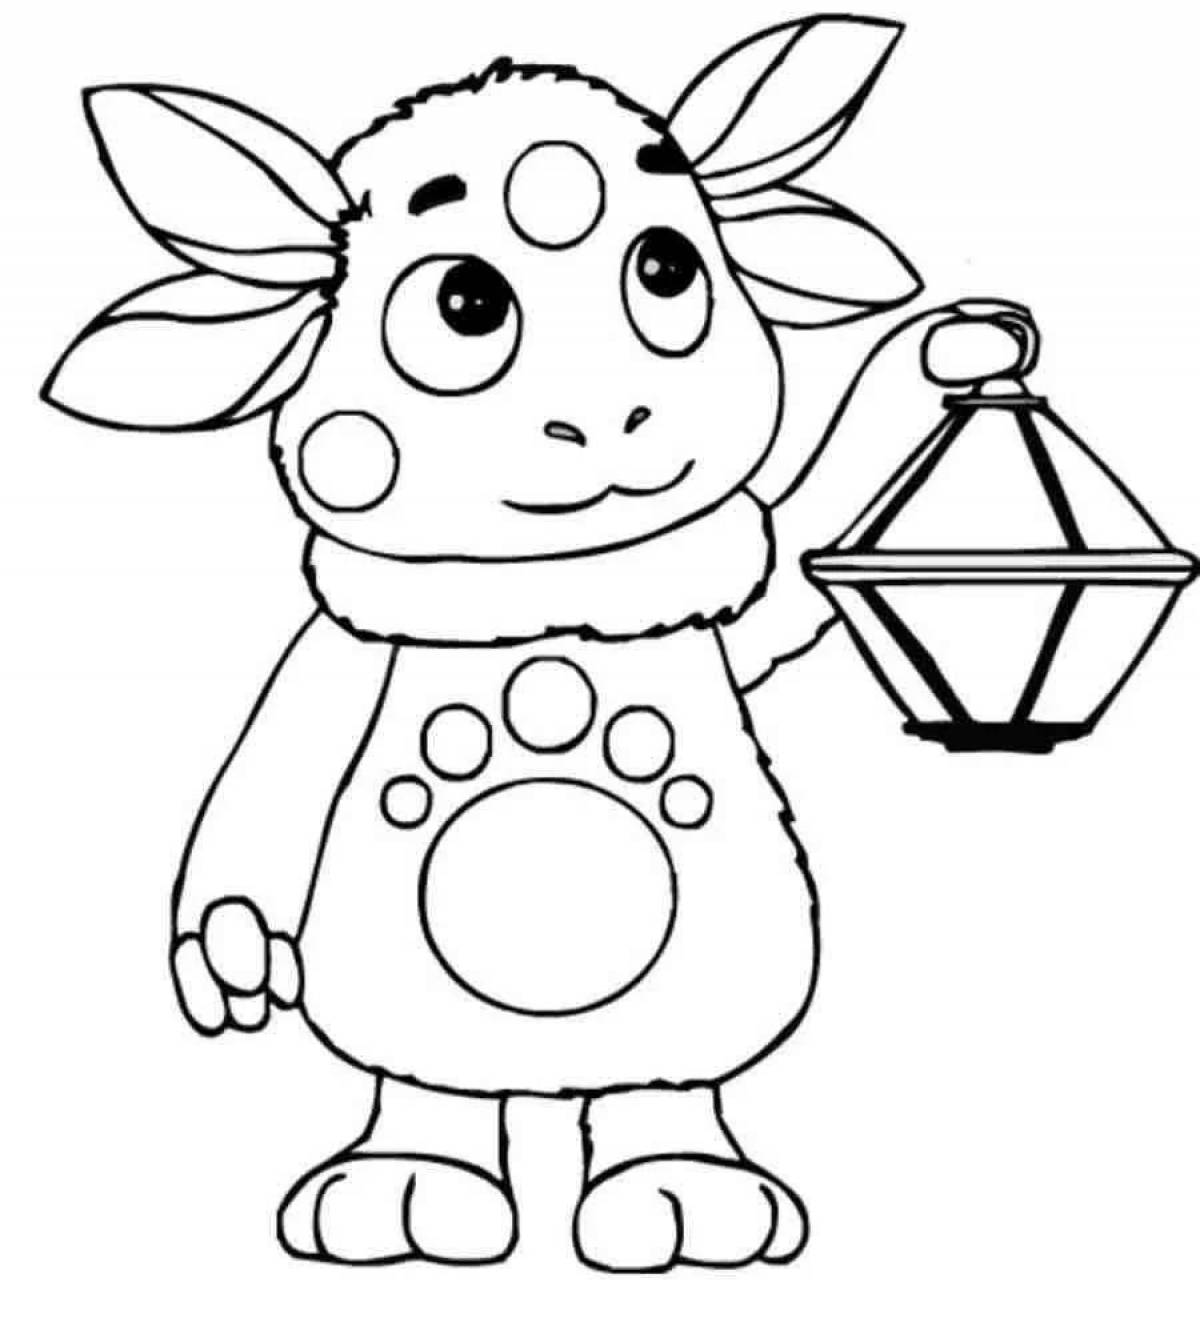 Adorable coloring page turn on